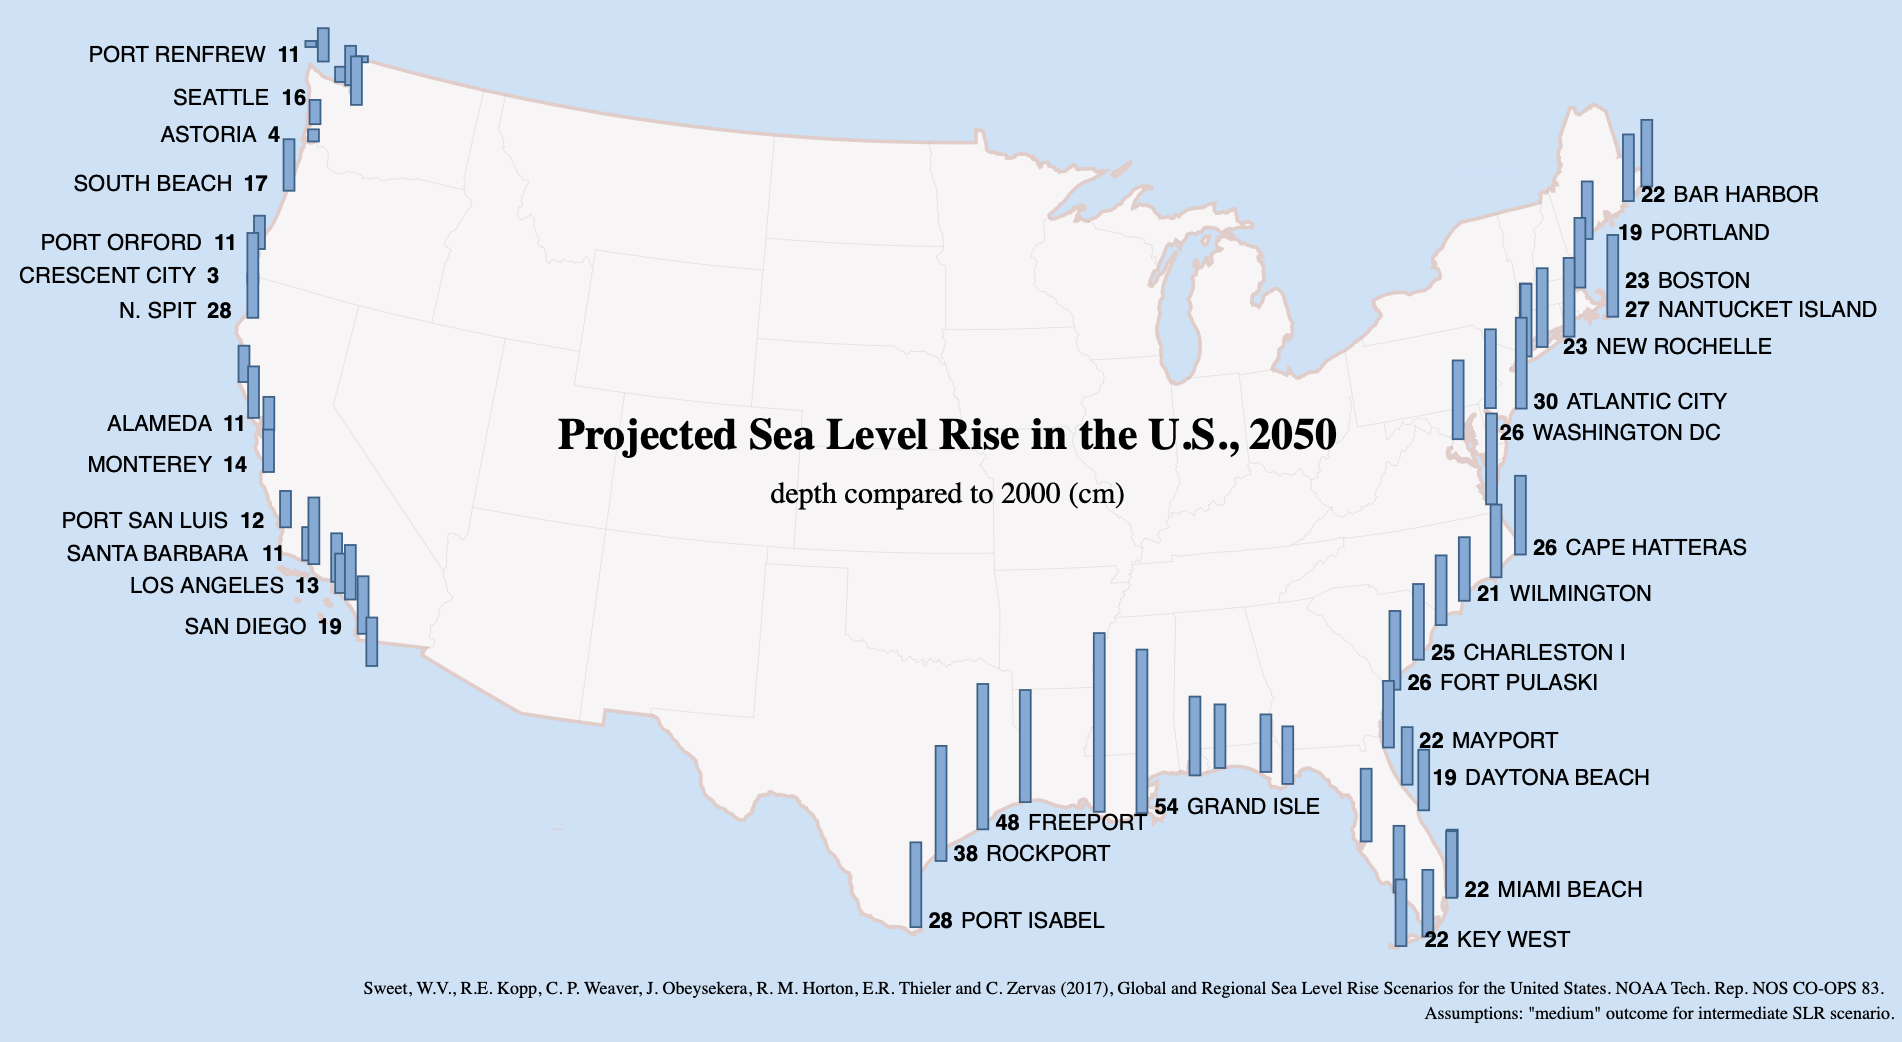 Flood - Projected sea level rise for US coastal cities